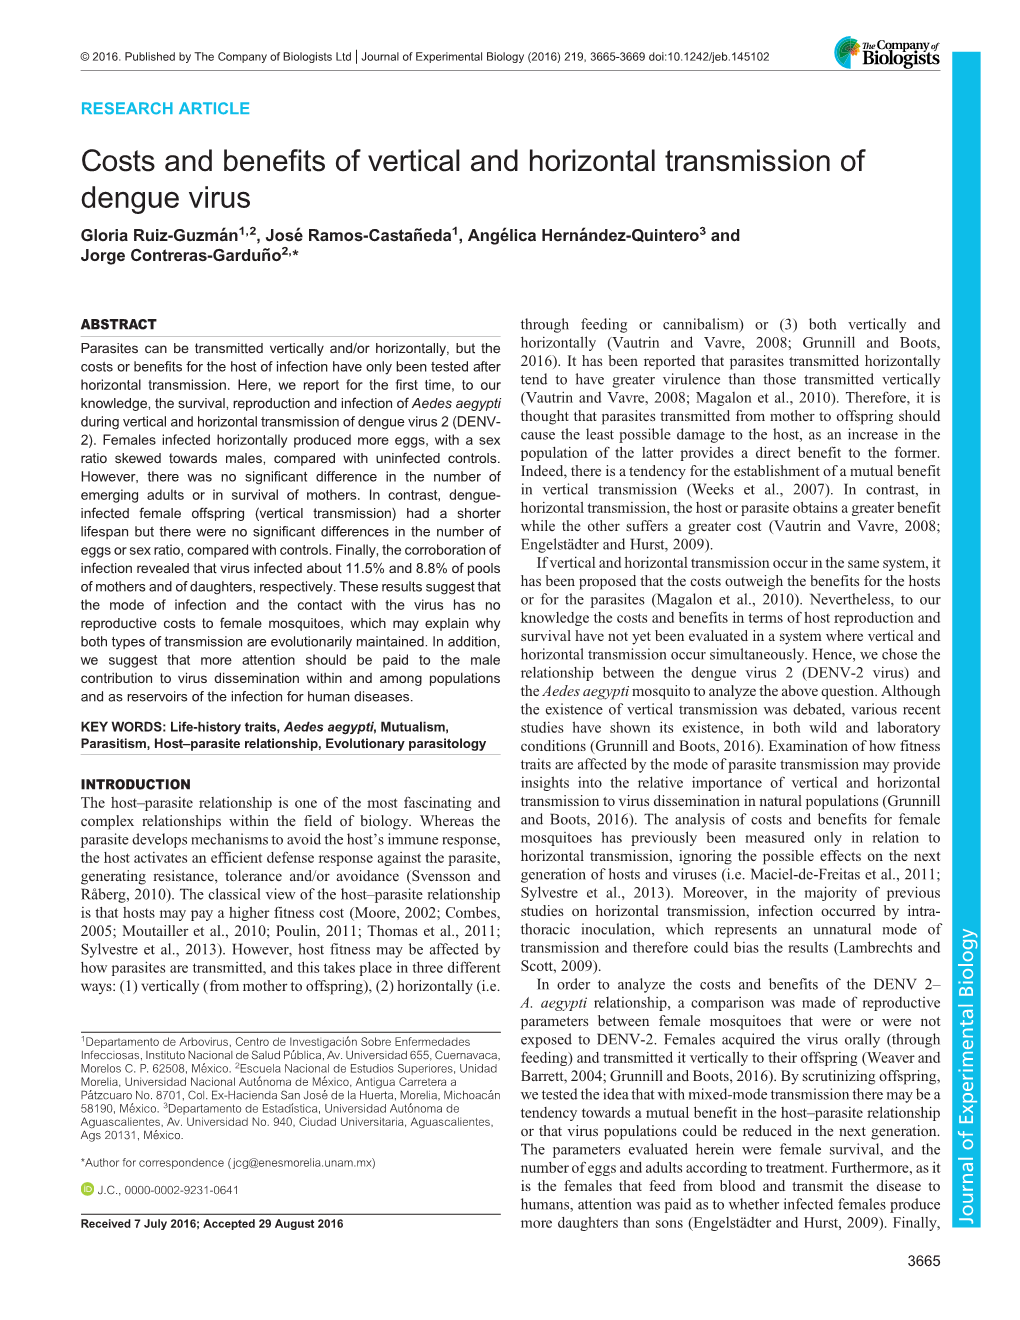 Costs and Benefits of Vertical and Horizontal Transmission of Dengue